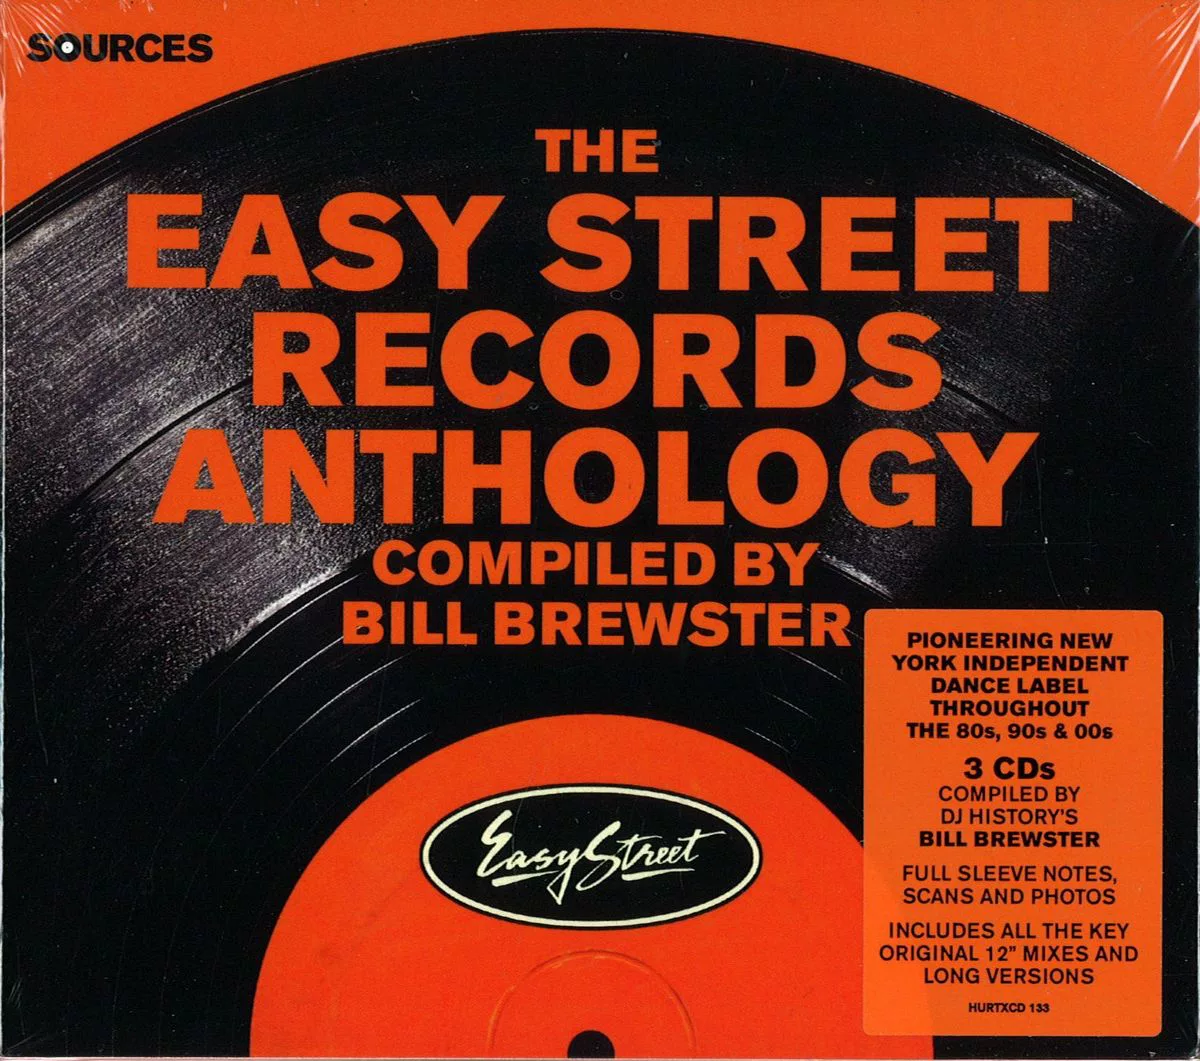 VA - Sources - The Easy Street Anthology Compiled By Bill Brewster